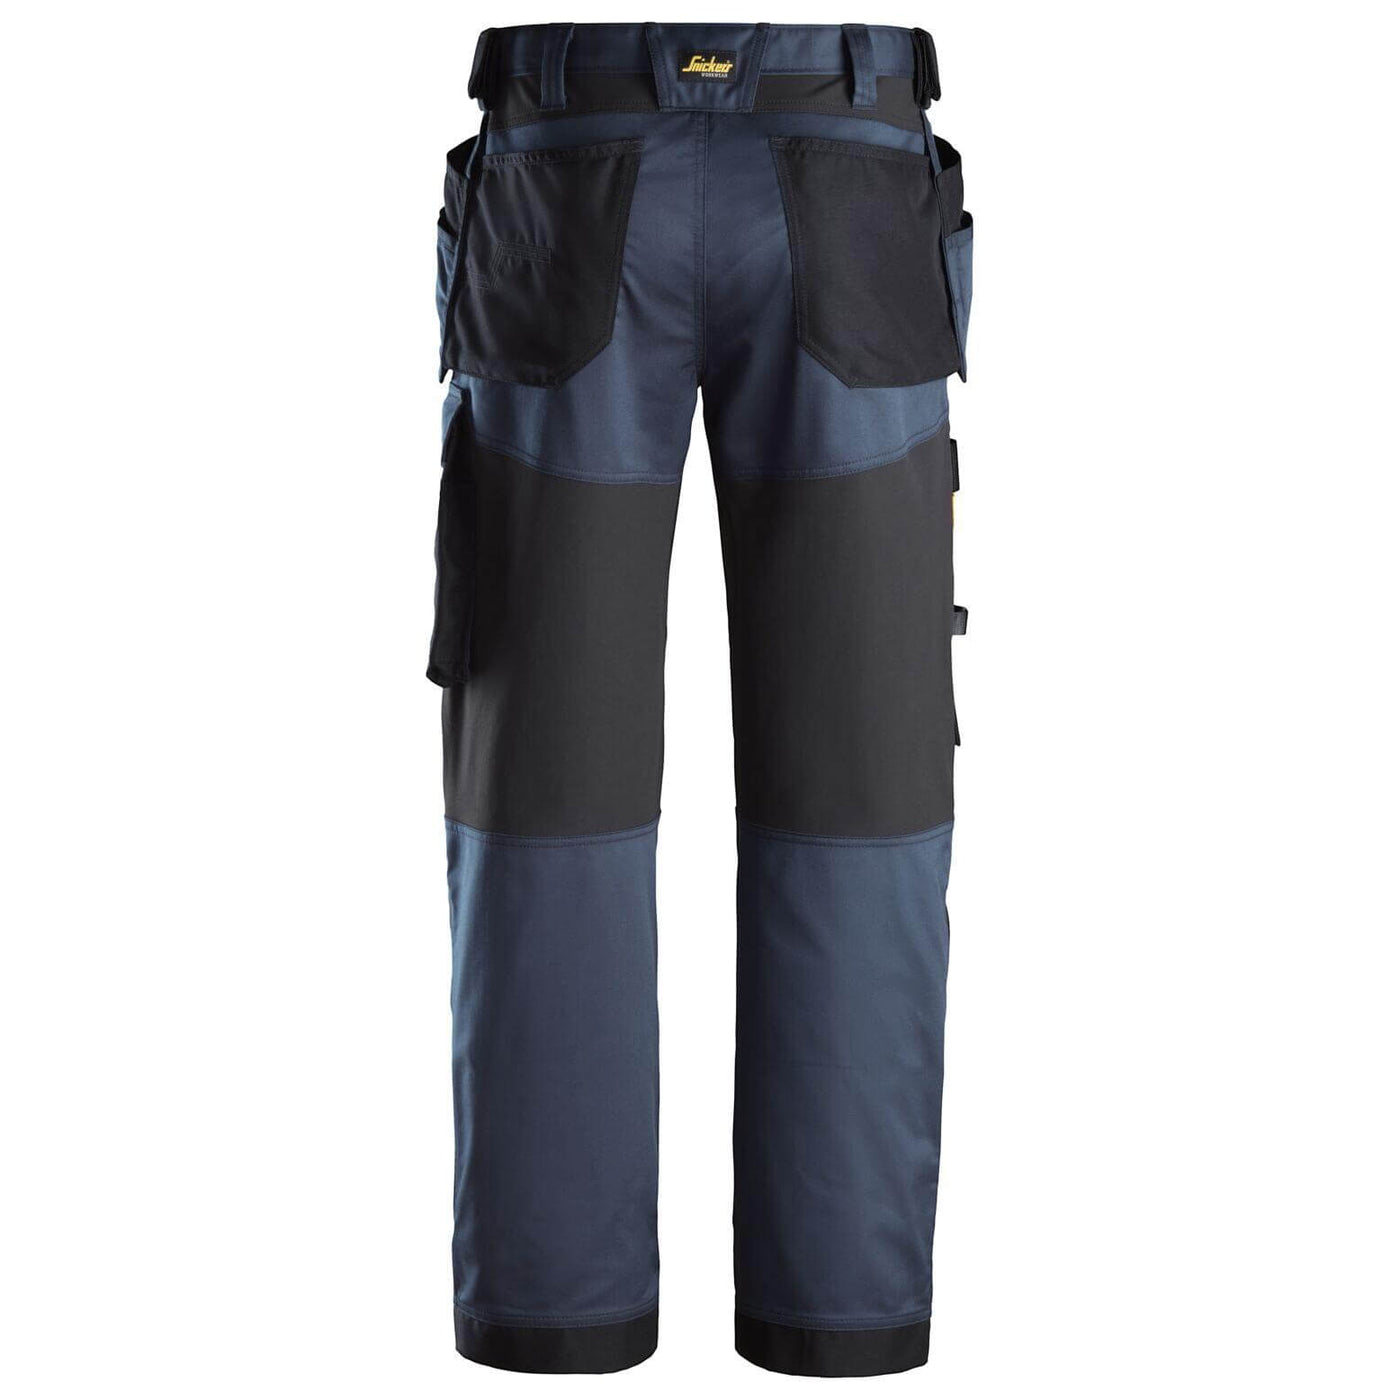 Snickers 6251 AllroundWork Stretch Loose fit Work Trousers with Holster Pockets Navy Black back #colour_navy-black